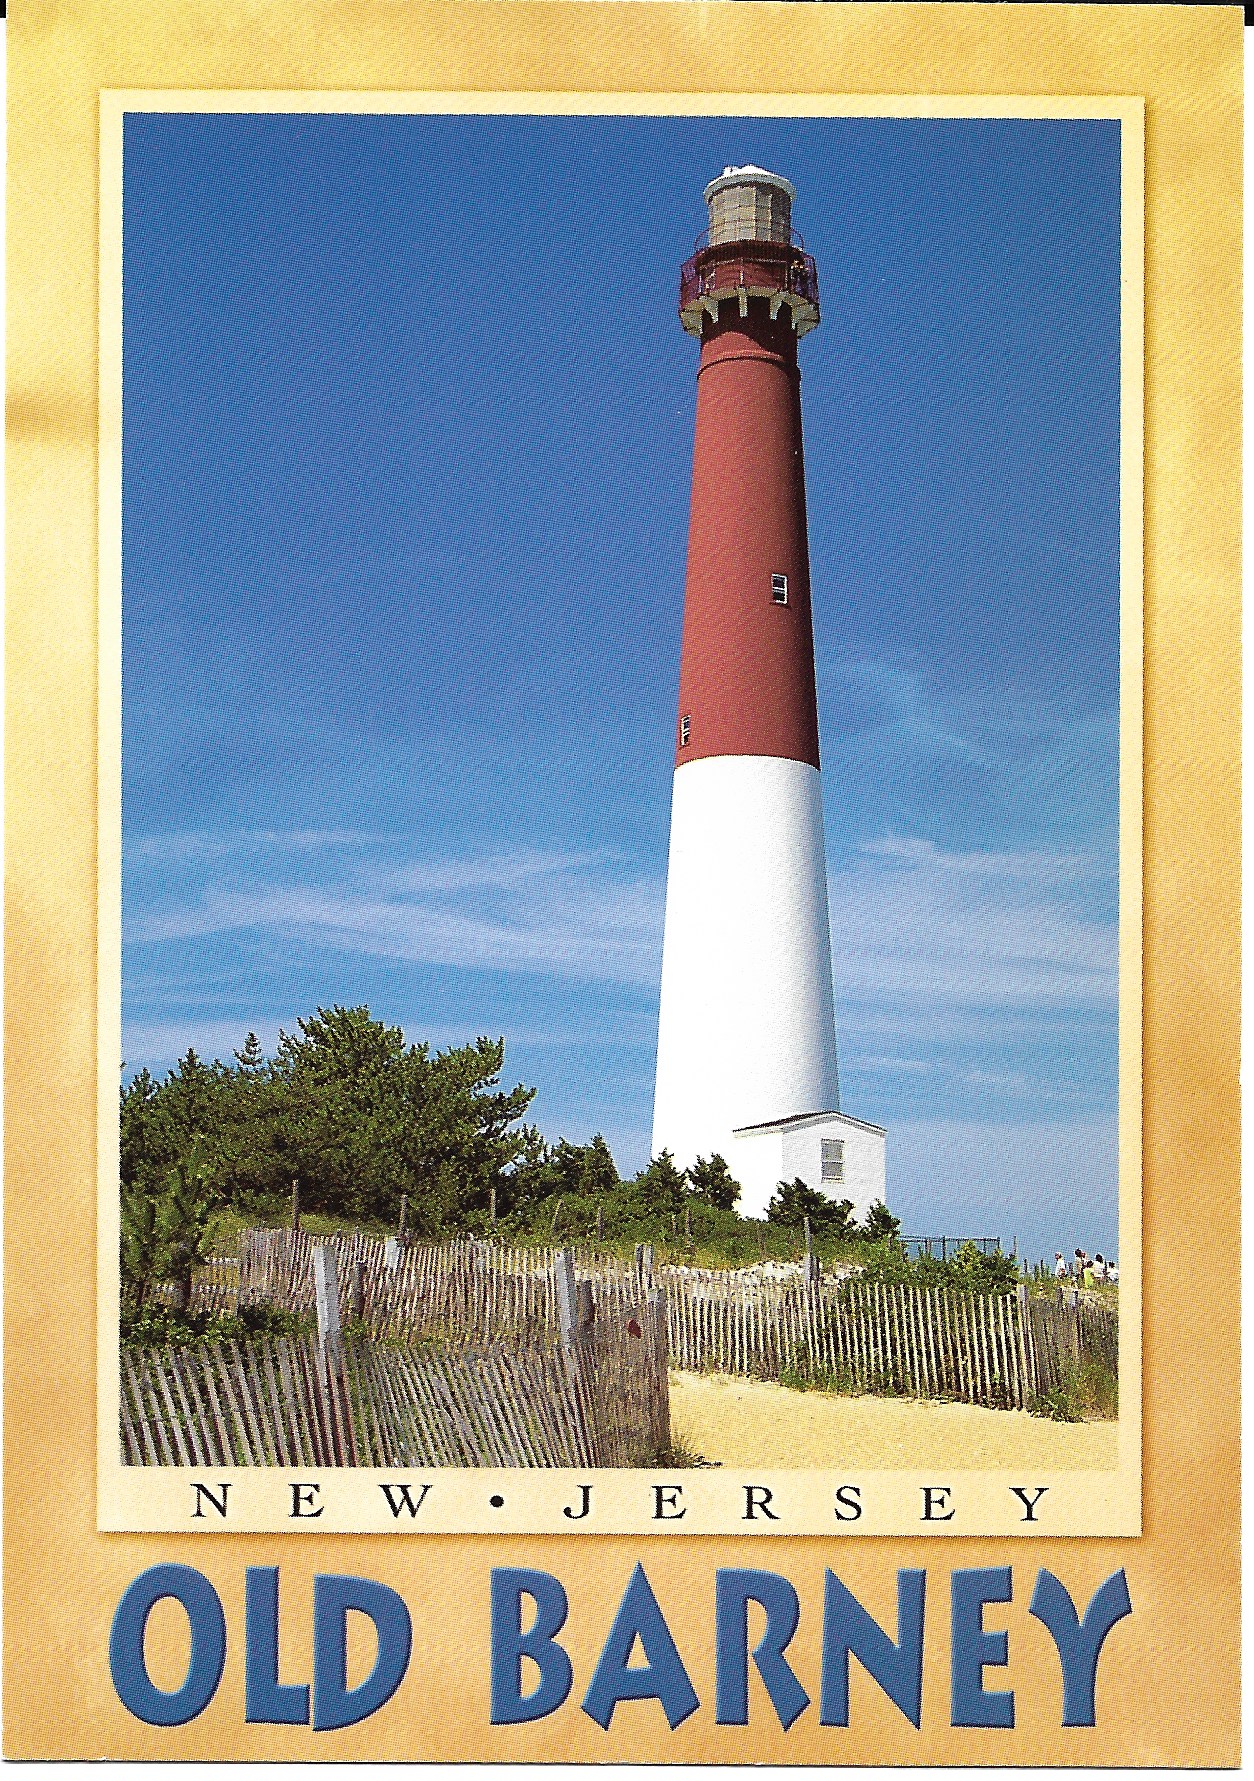 Old Barney: The Light That Never Fails – Historical Society of Riverton, NJ